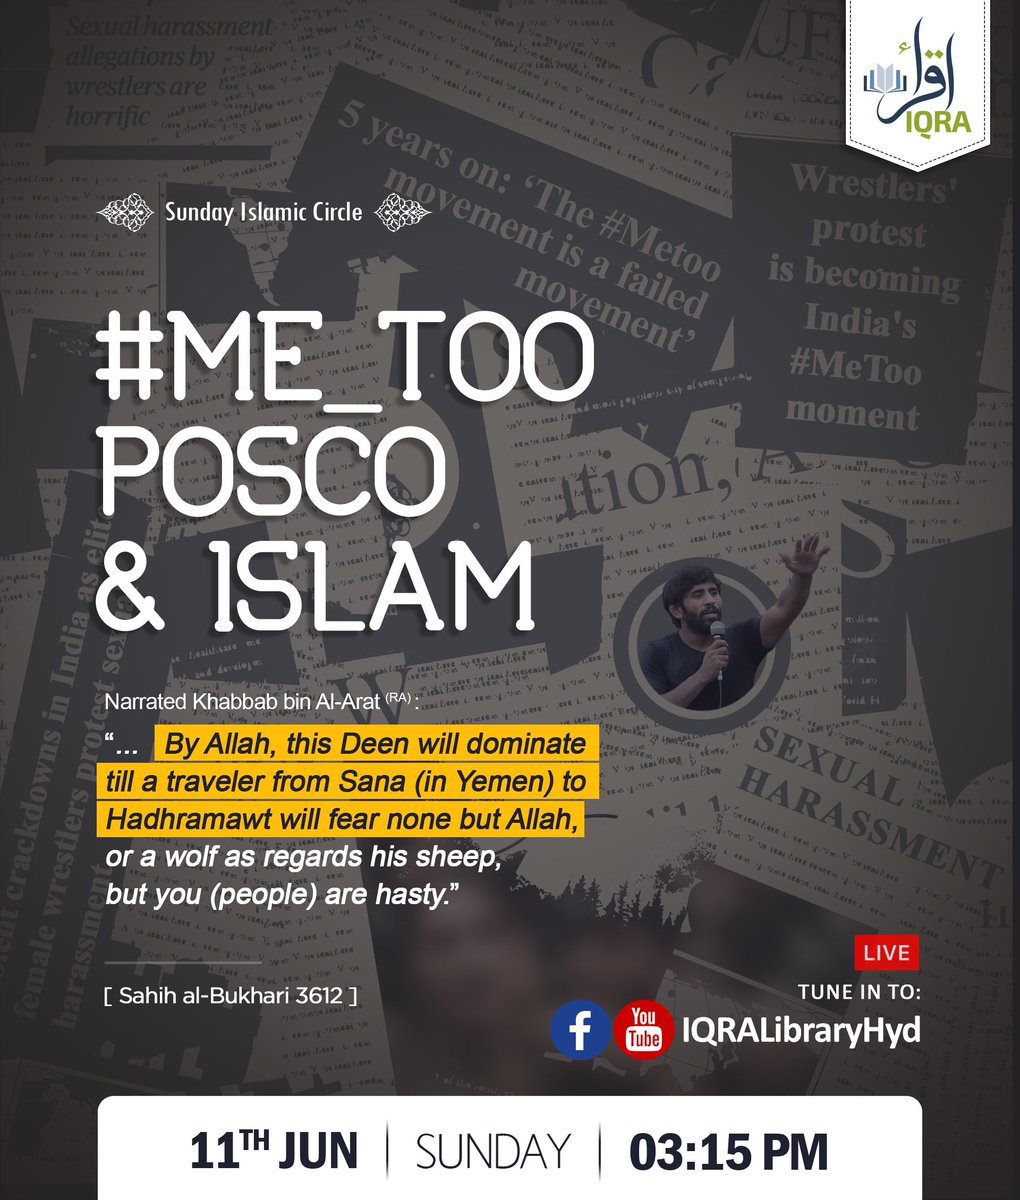 Sunday Islamic Circle: '#ME_TOO POSCO AND ISLAM' | Sunday (11-Jun) | 3:15 PM
Join us in this Sunday Circle in-sha’-Allah. Do not forget to invite others. JazakAllahu khayran!
Tune into:
YouTube: youtube.com/IQRALibraryHyd
Facebook: fb.com/IQRALibraryHyd
#metoomovement #women